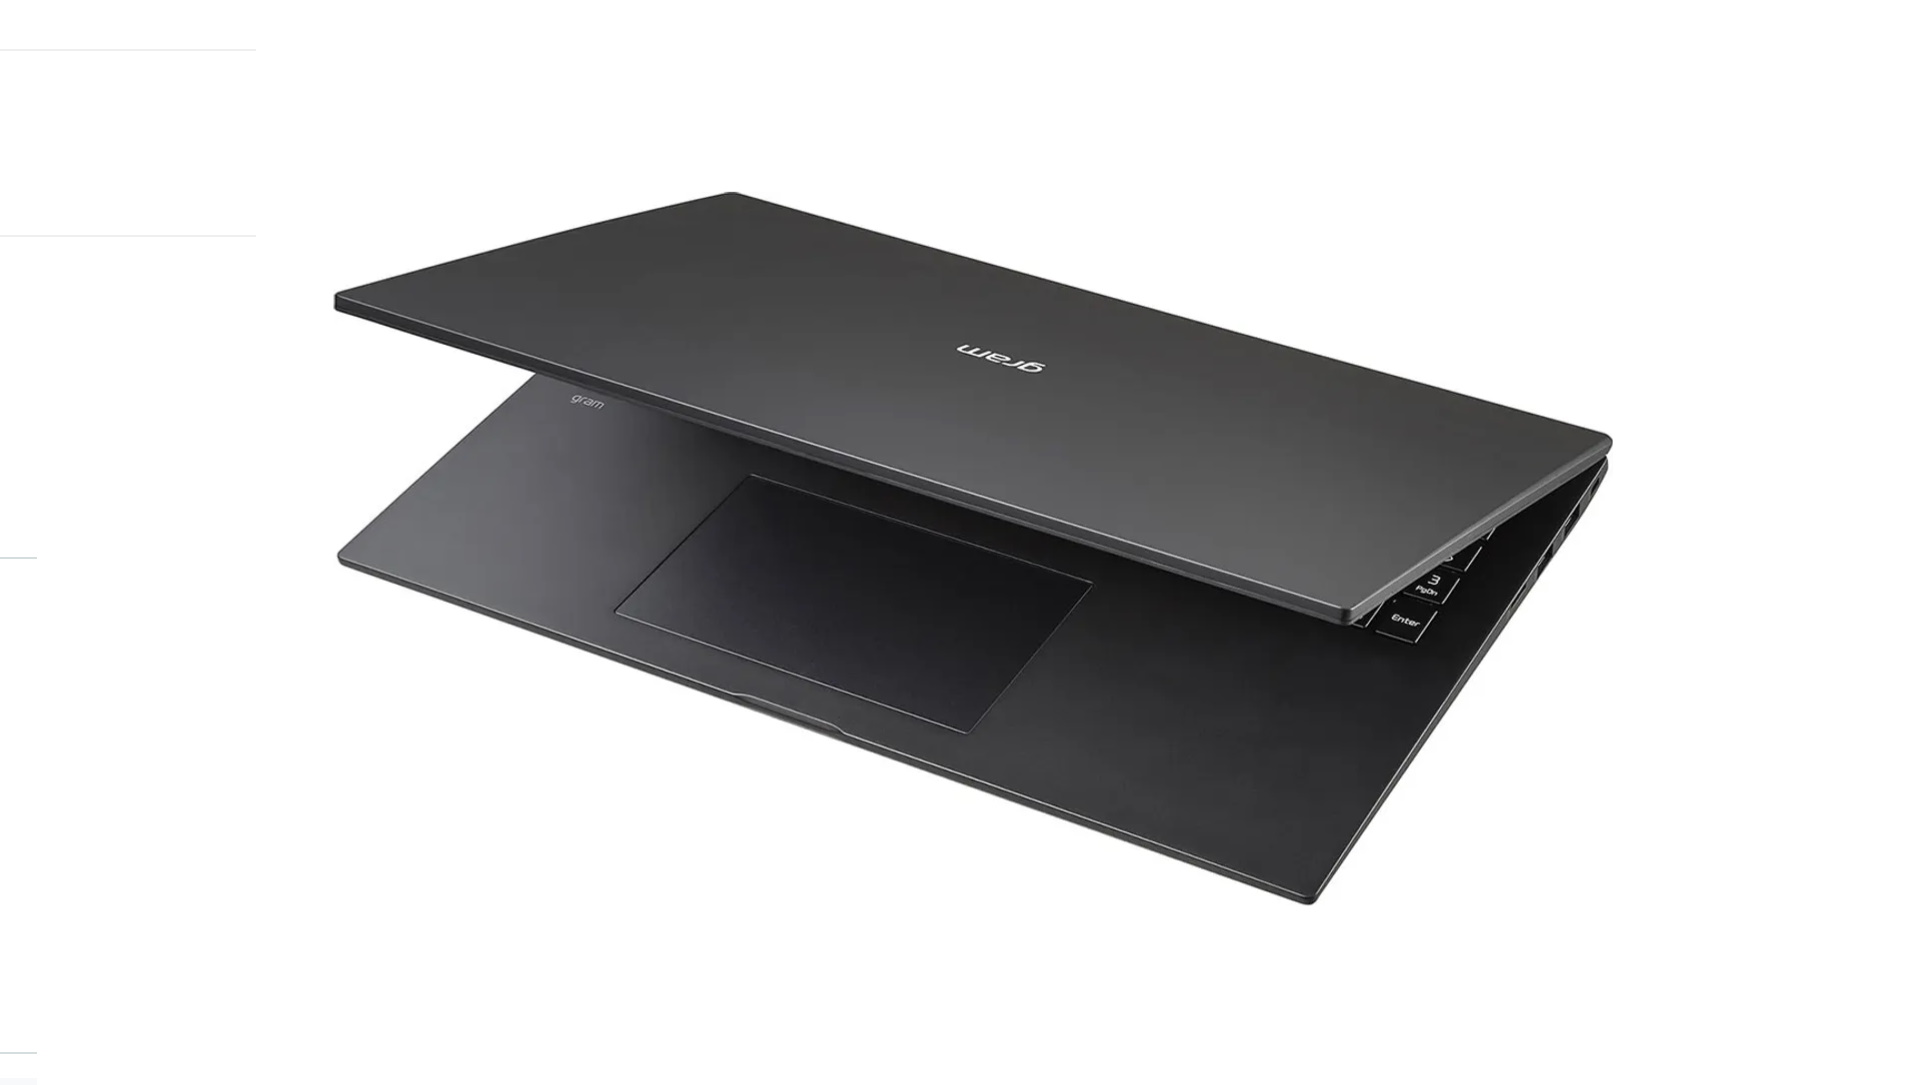 Image of the LG Gram 16 (2021) laptop with lid partially closed